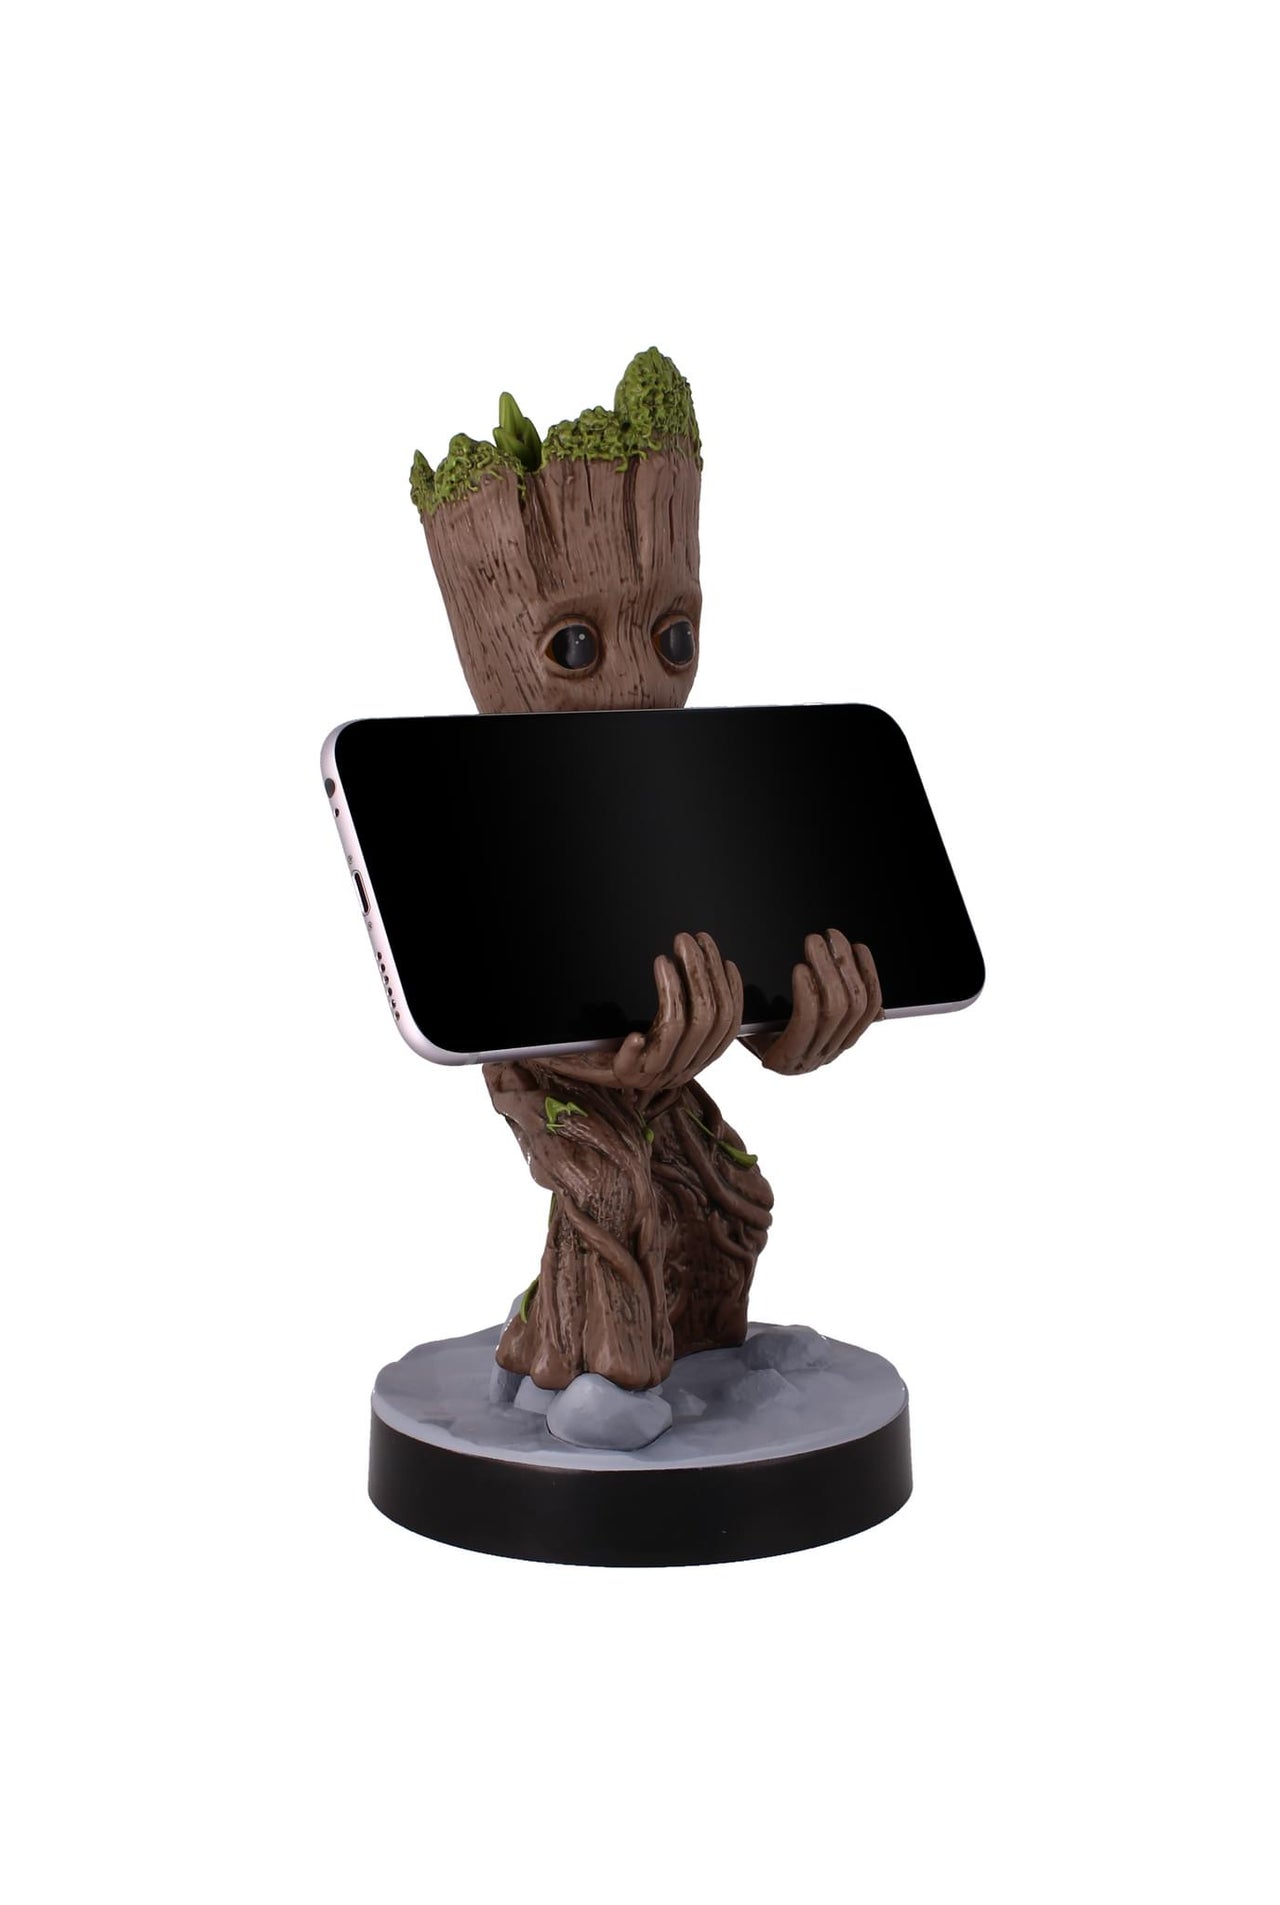 Guardians of The Galaxy: Toddler Groot Cable Guys Original Controller and Phone Holder